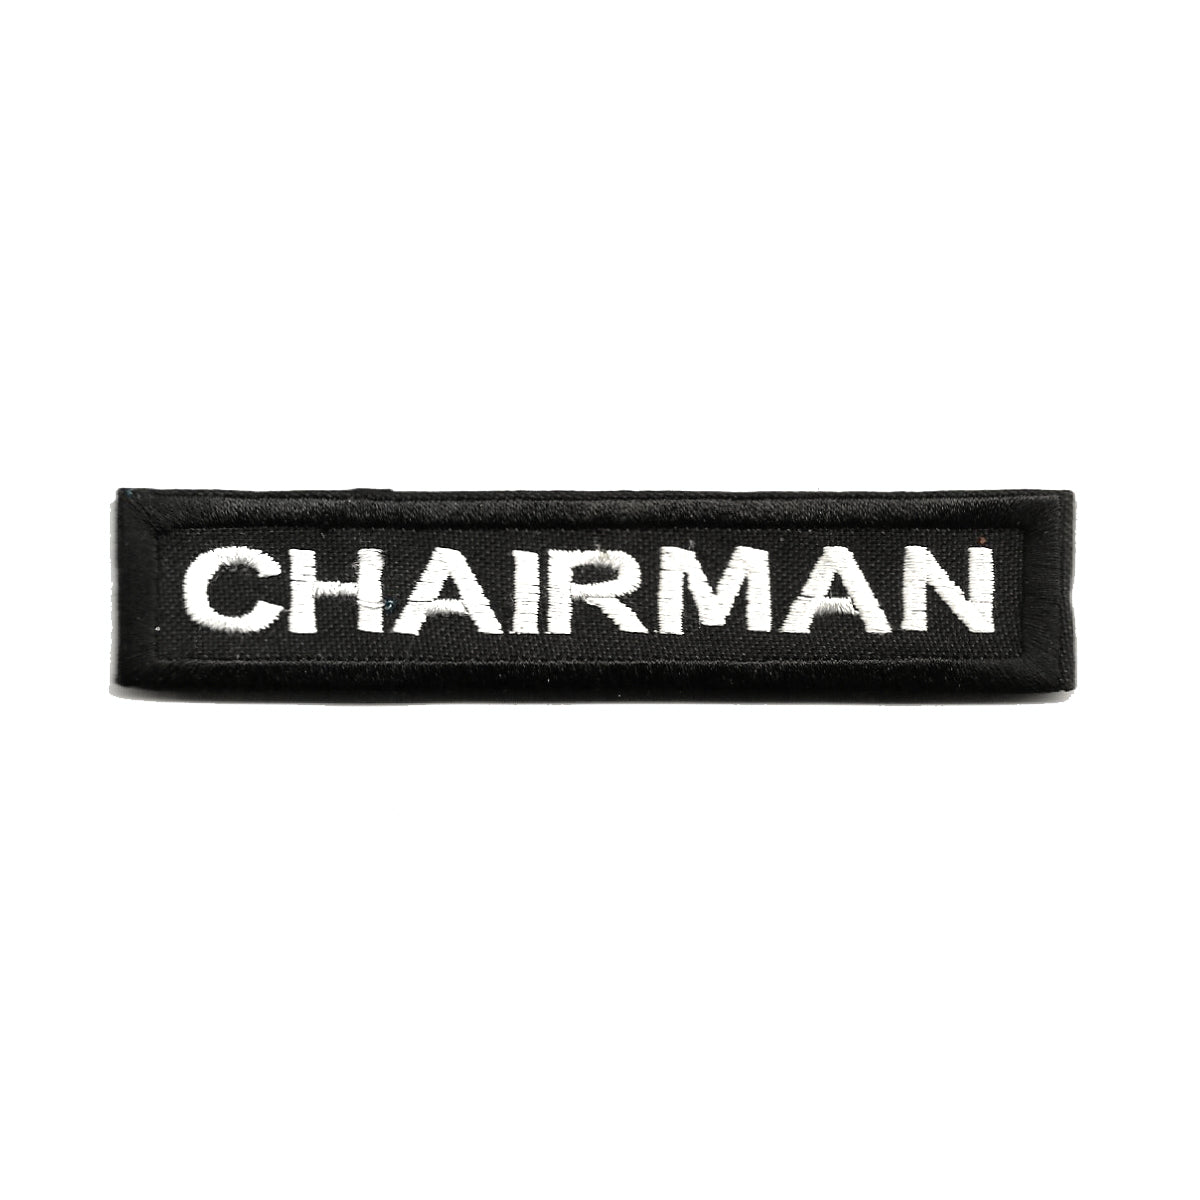 Chairman Name Patch- 4.8 x 1 inches